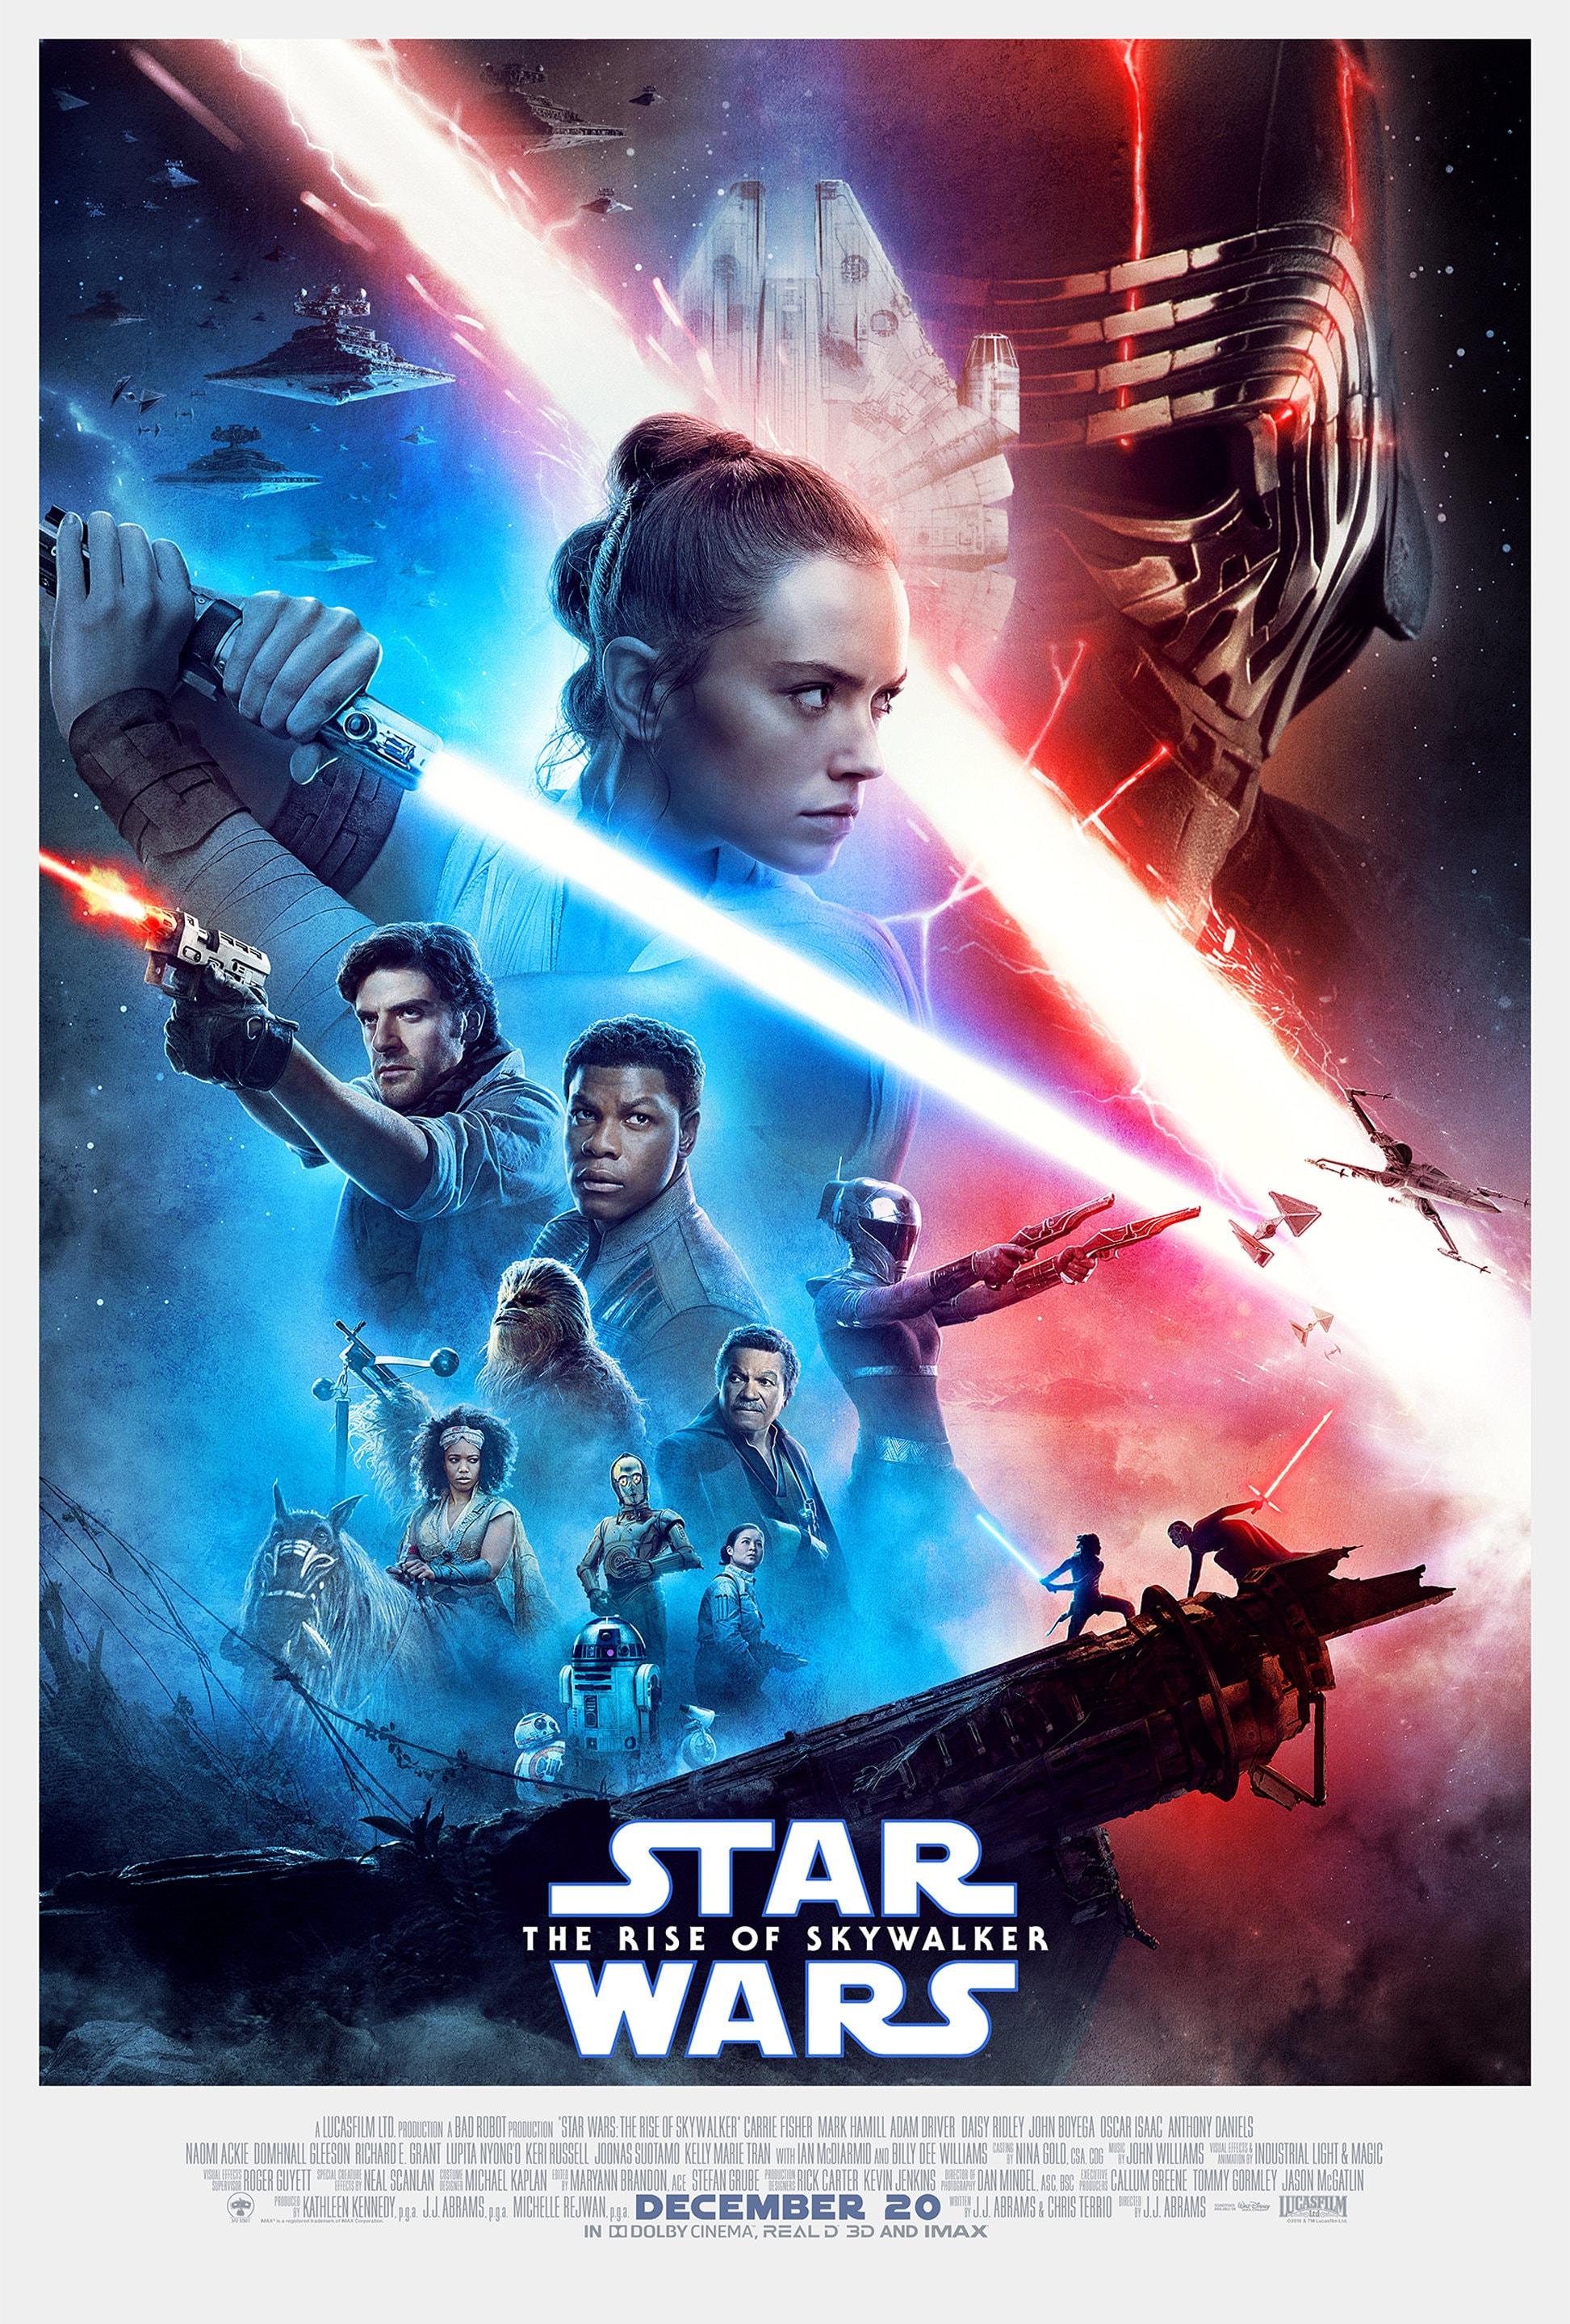 Star Wars the Rise of Skywalker Movie Poster High Quality Glossy Limited  Wall Art Print Photo Sizes 8x10 11x17 16x20 22x28 24x36 27x40 